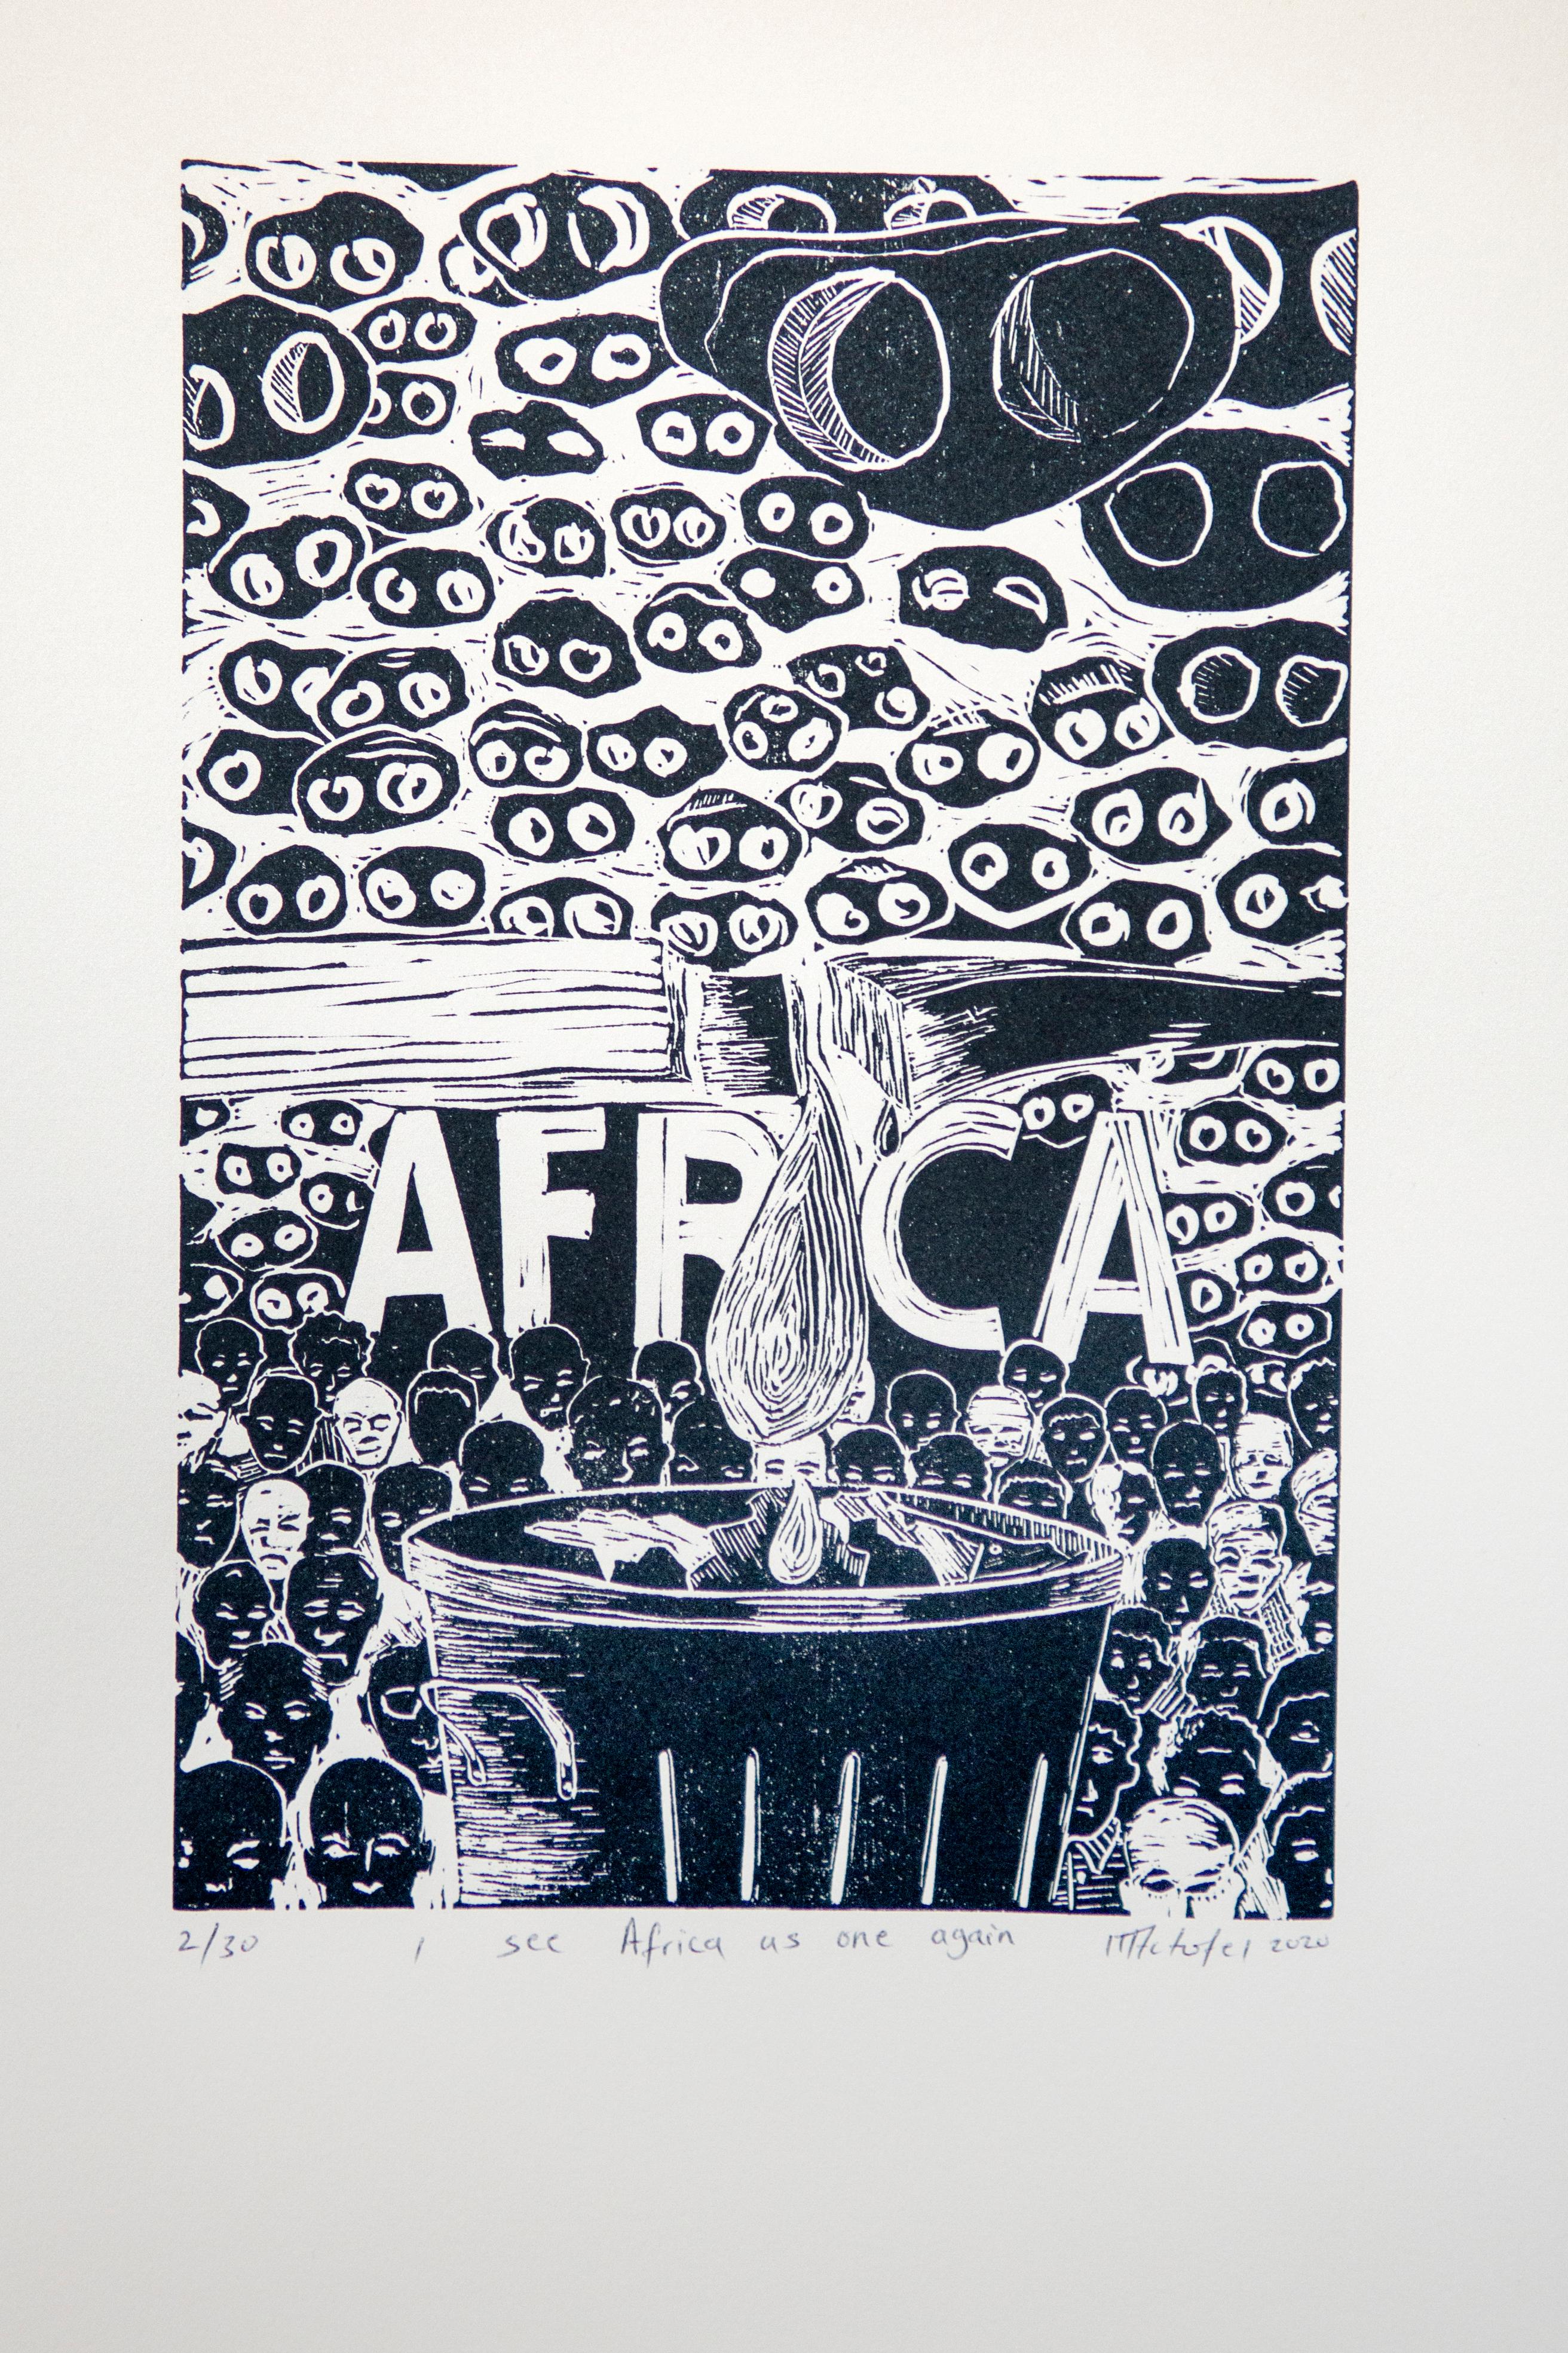 I see Africa as one again. Linoleum block print on ivory rosaspina fabriano - Contemporary Print by Actofel Ilovu